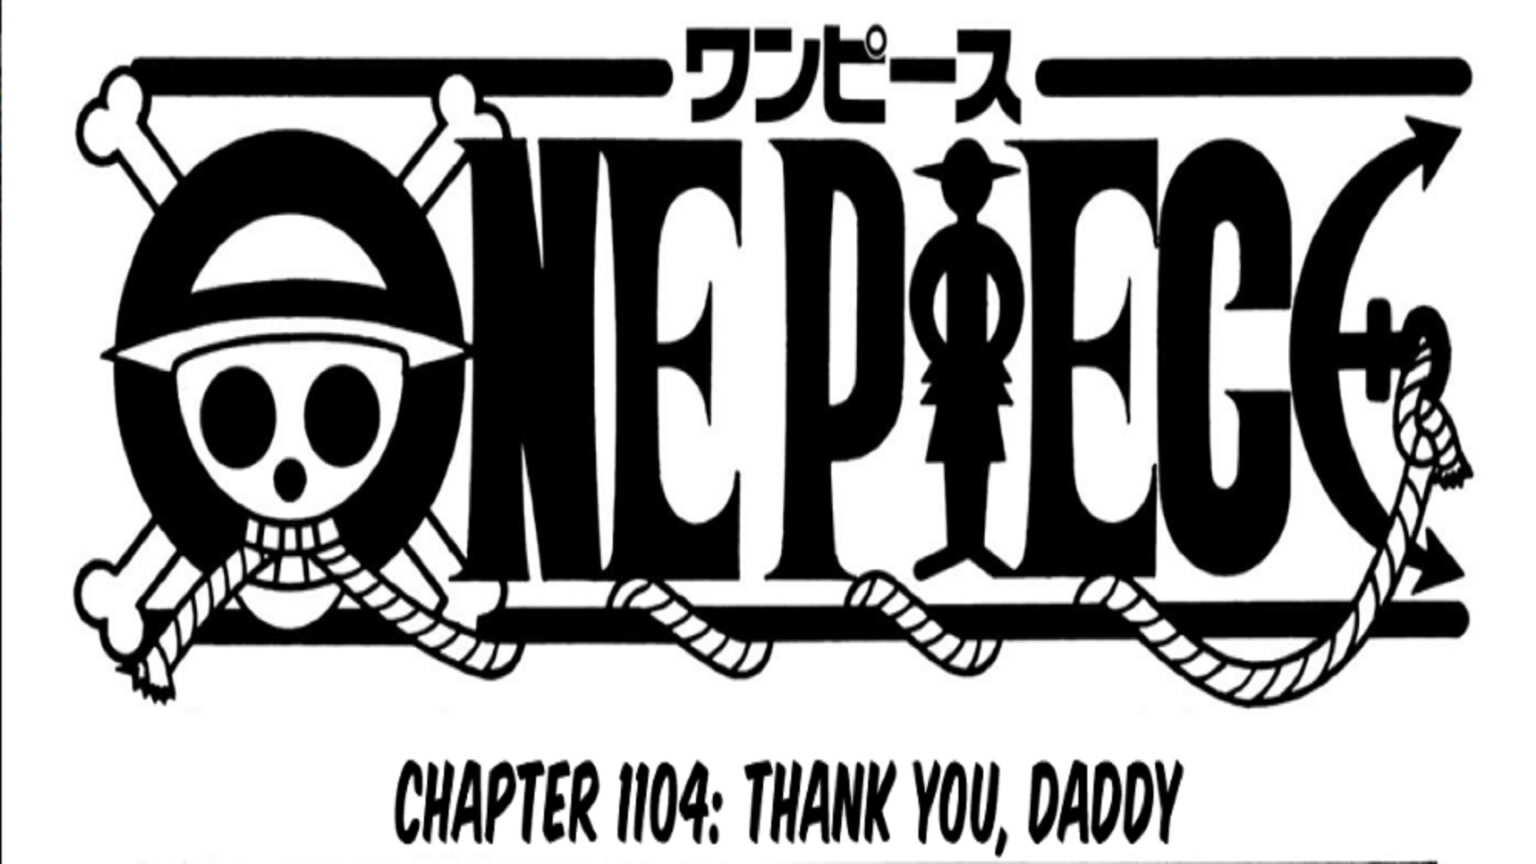 One Piece Chapter 1104 is bringing the story of Egghead Island to a close.